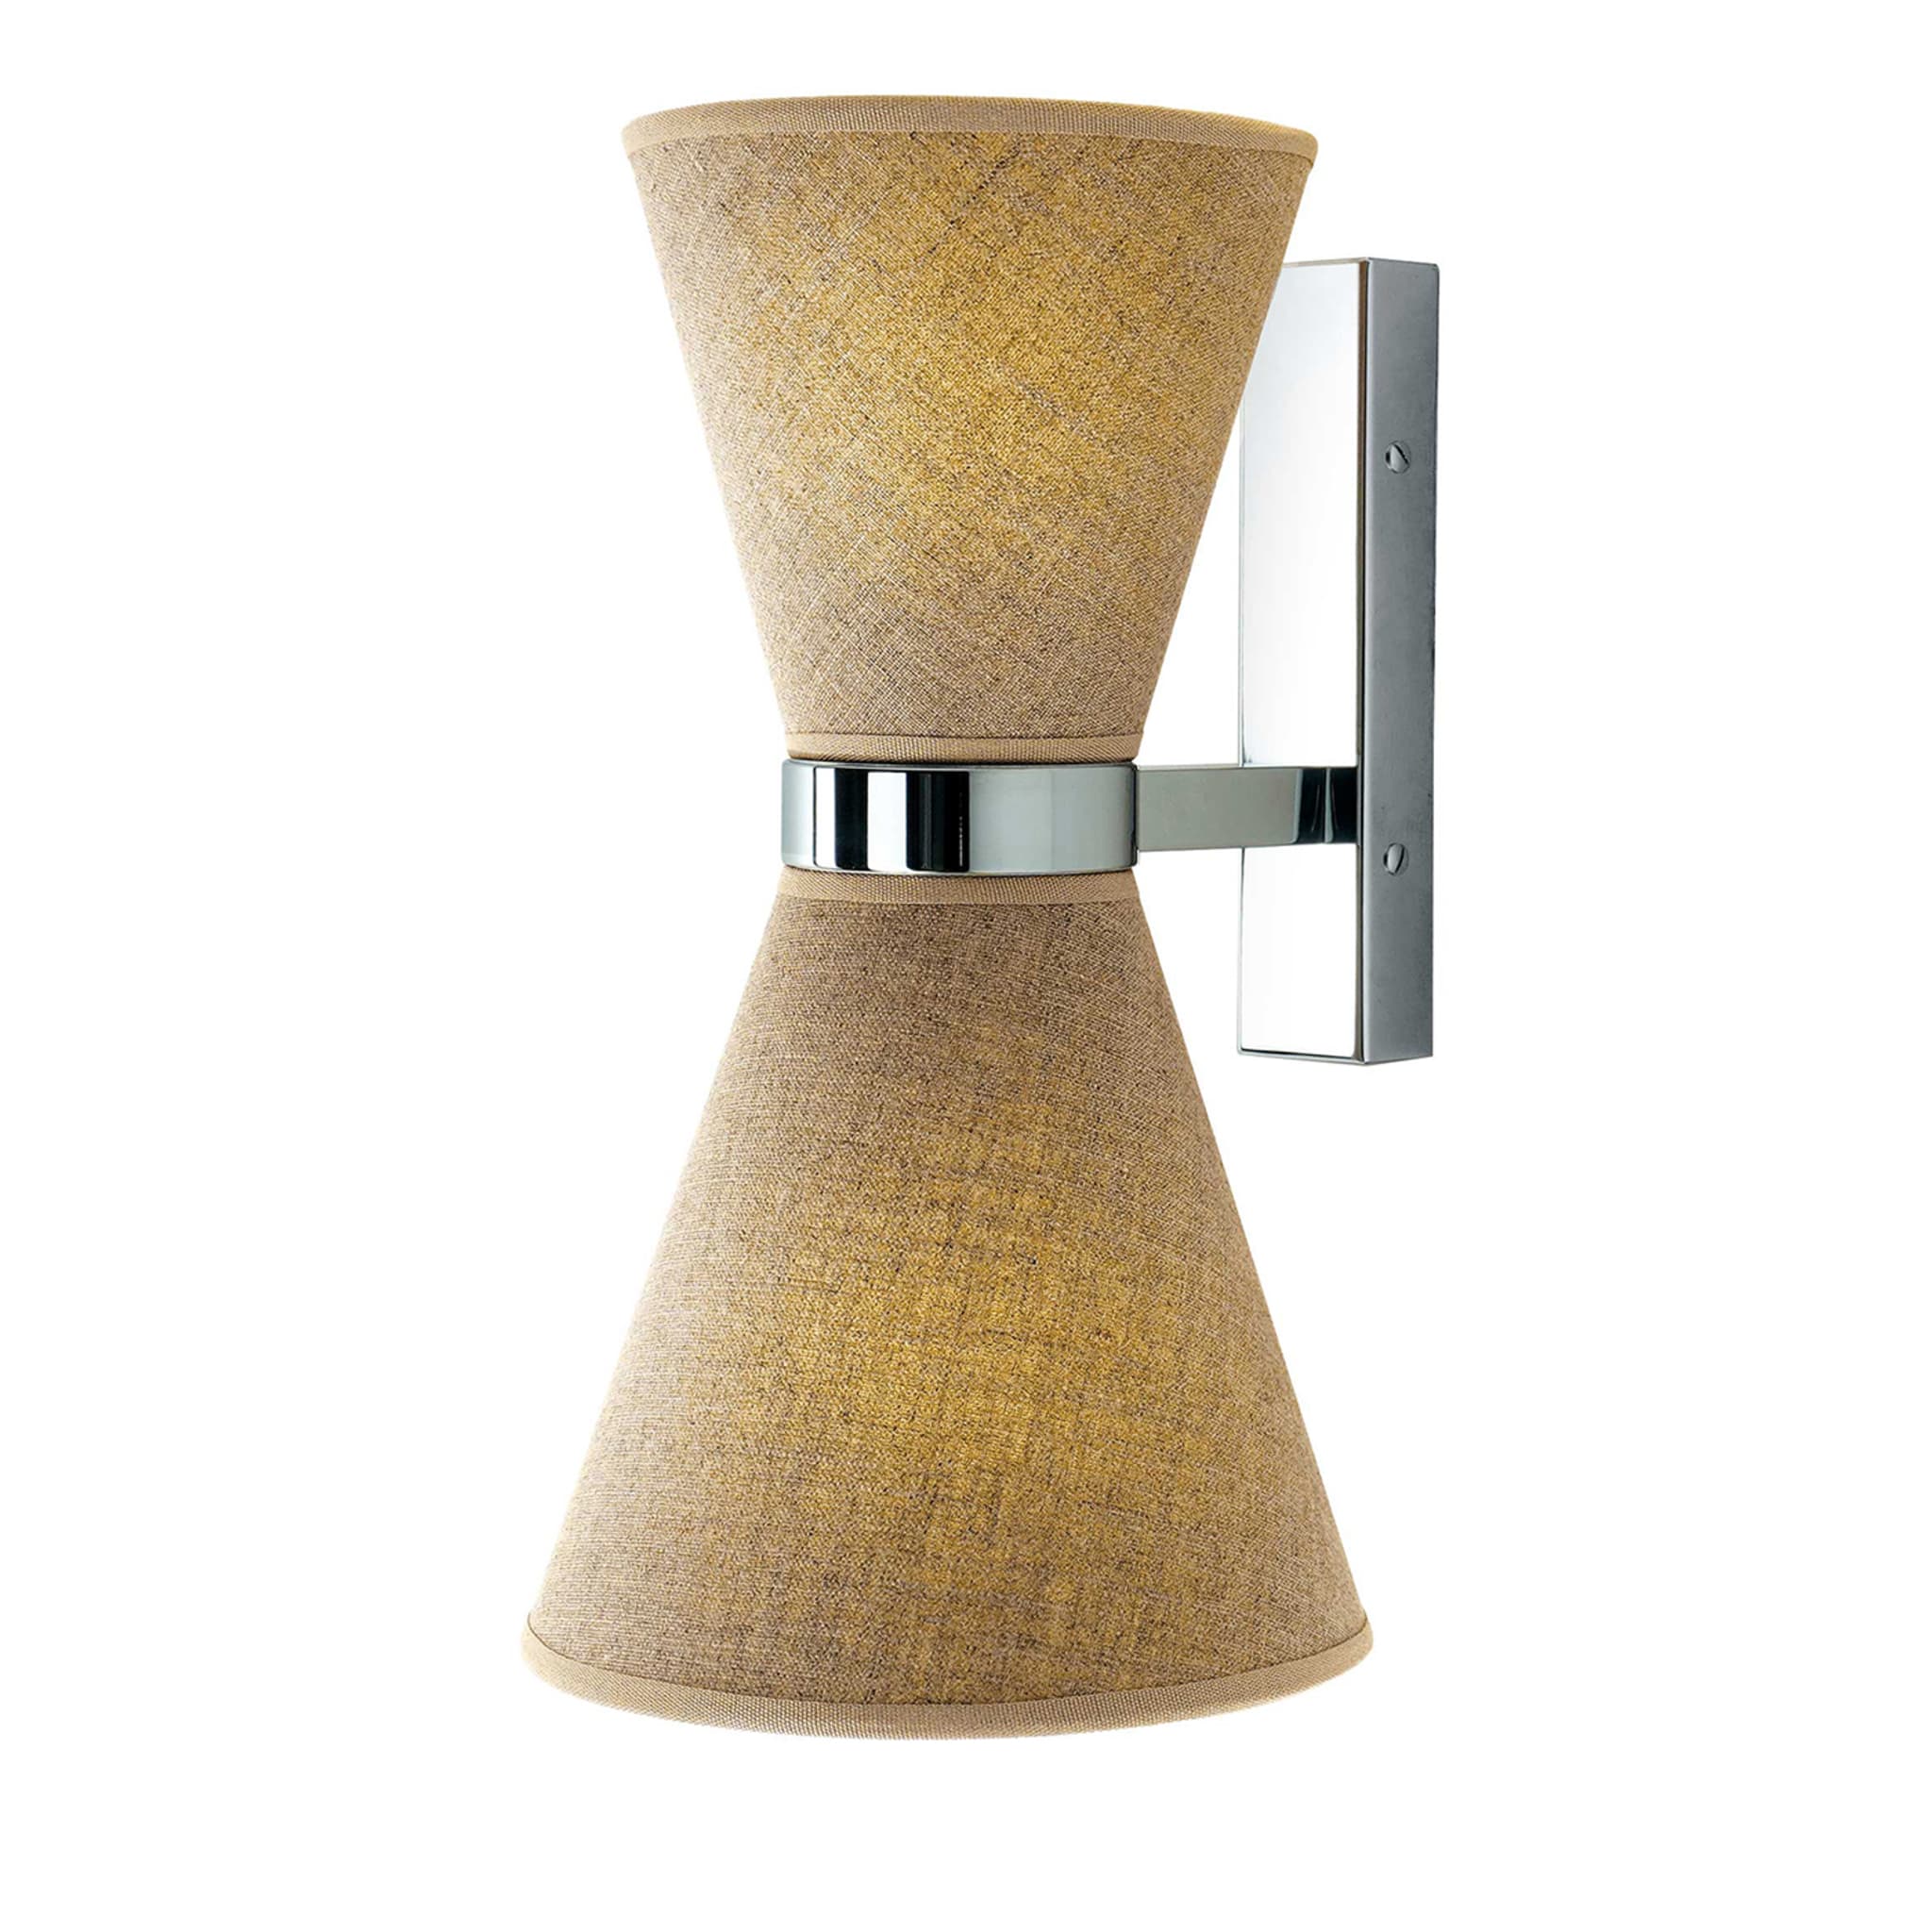 Divina M285 2-Light Wall Lamp by Stefano Tabarin - Main view